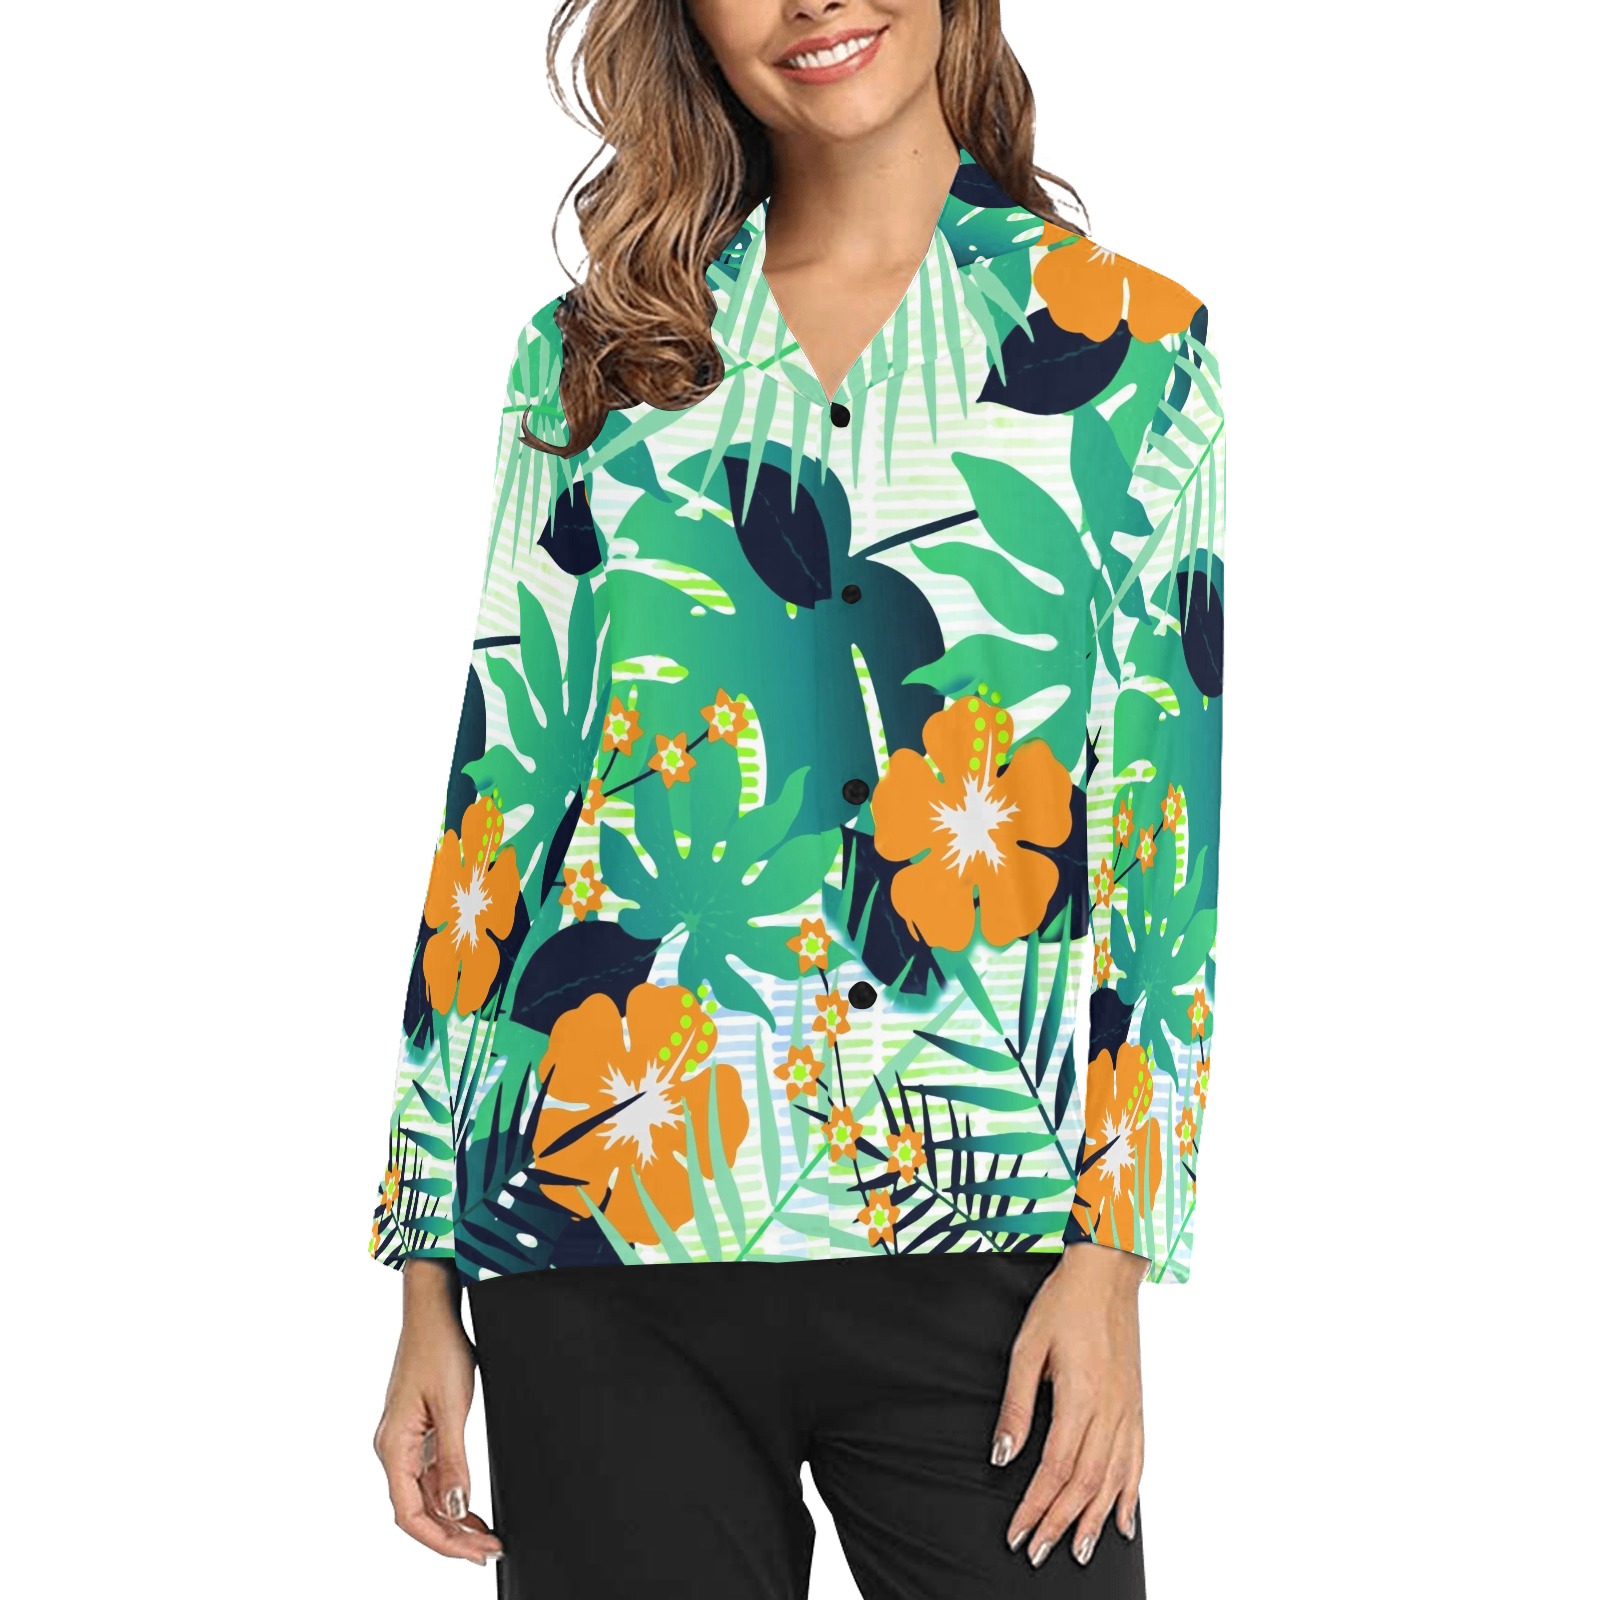 GROOVY FUNK THING FLORAL Women's Long Sleeve Pajama Shirt